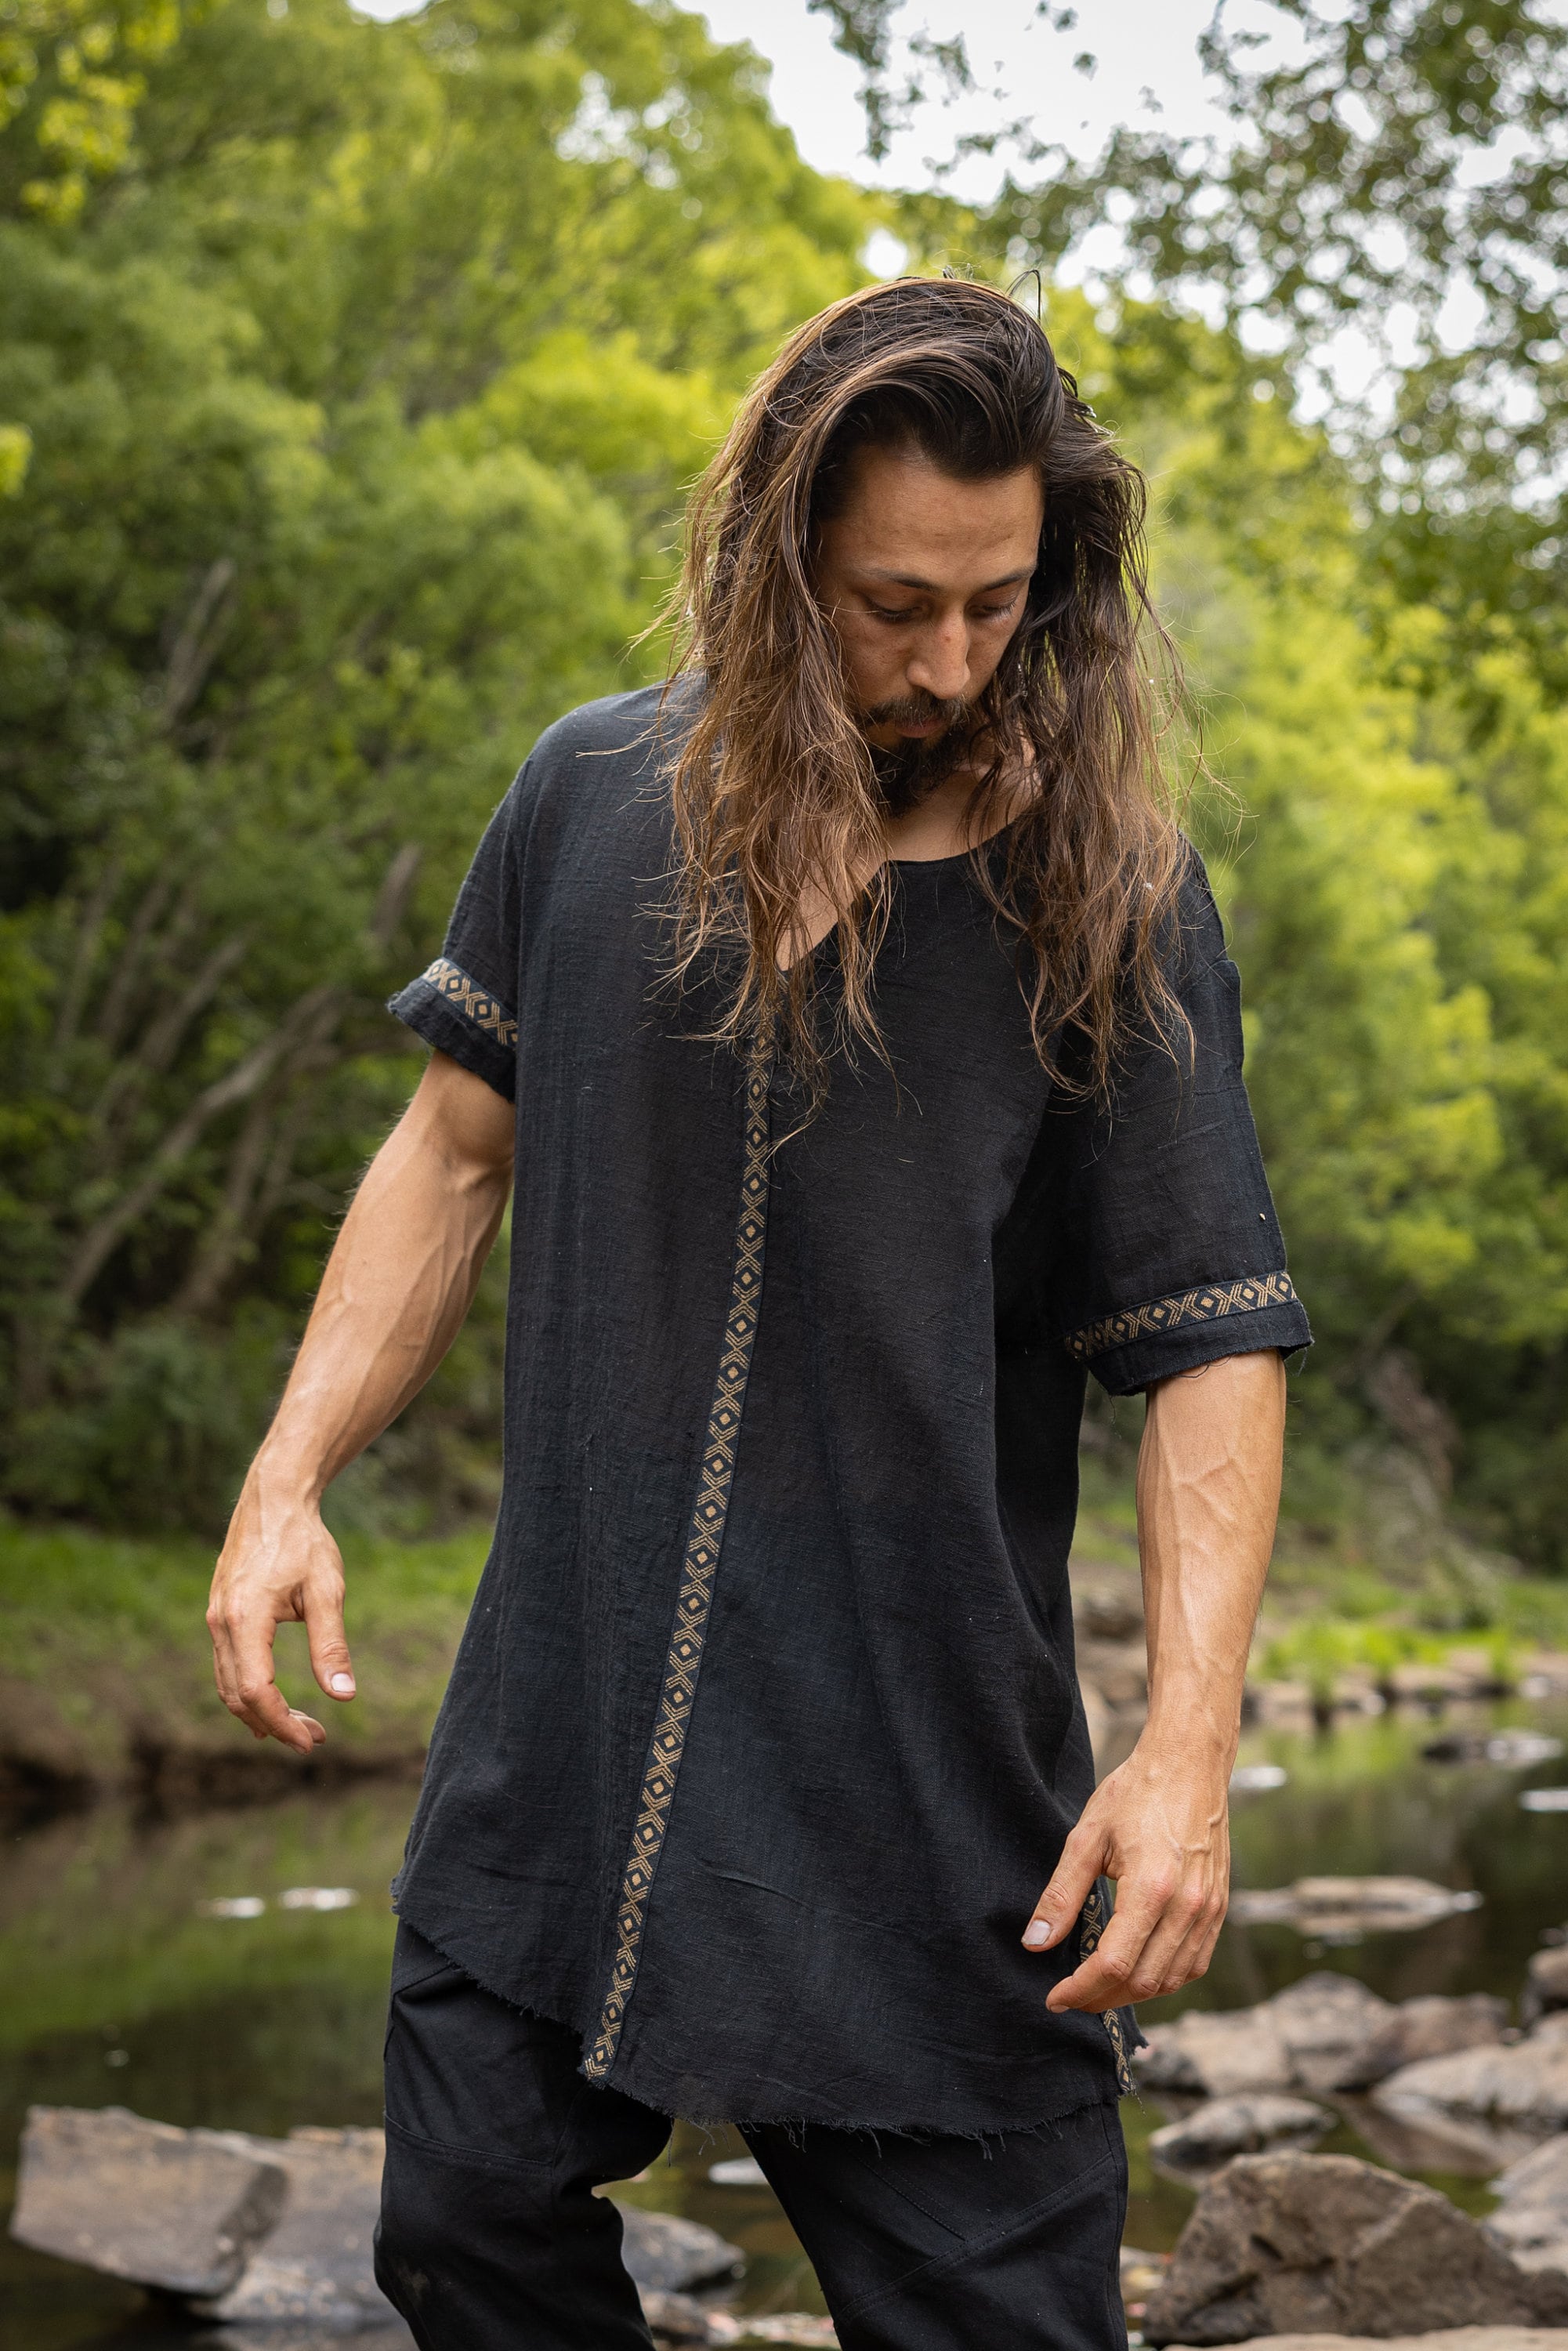 Our IKRAN cotton shirt is made of 100% natural breathable soft cotton. It is naturally dyed, and stone washed, has an open V-Neck design for maximal comfort and style and is decorated with tribal patterns.